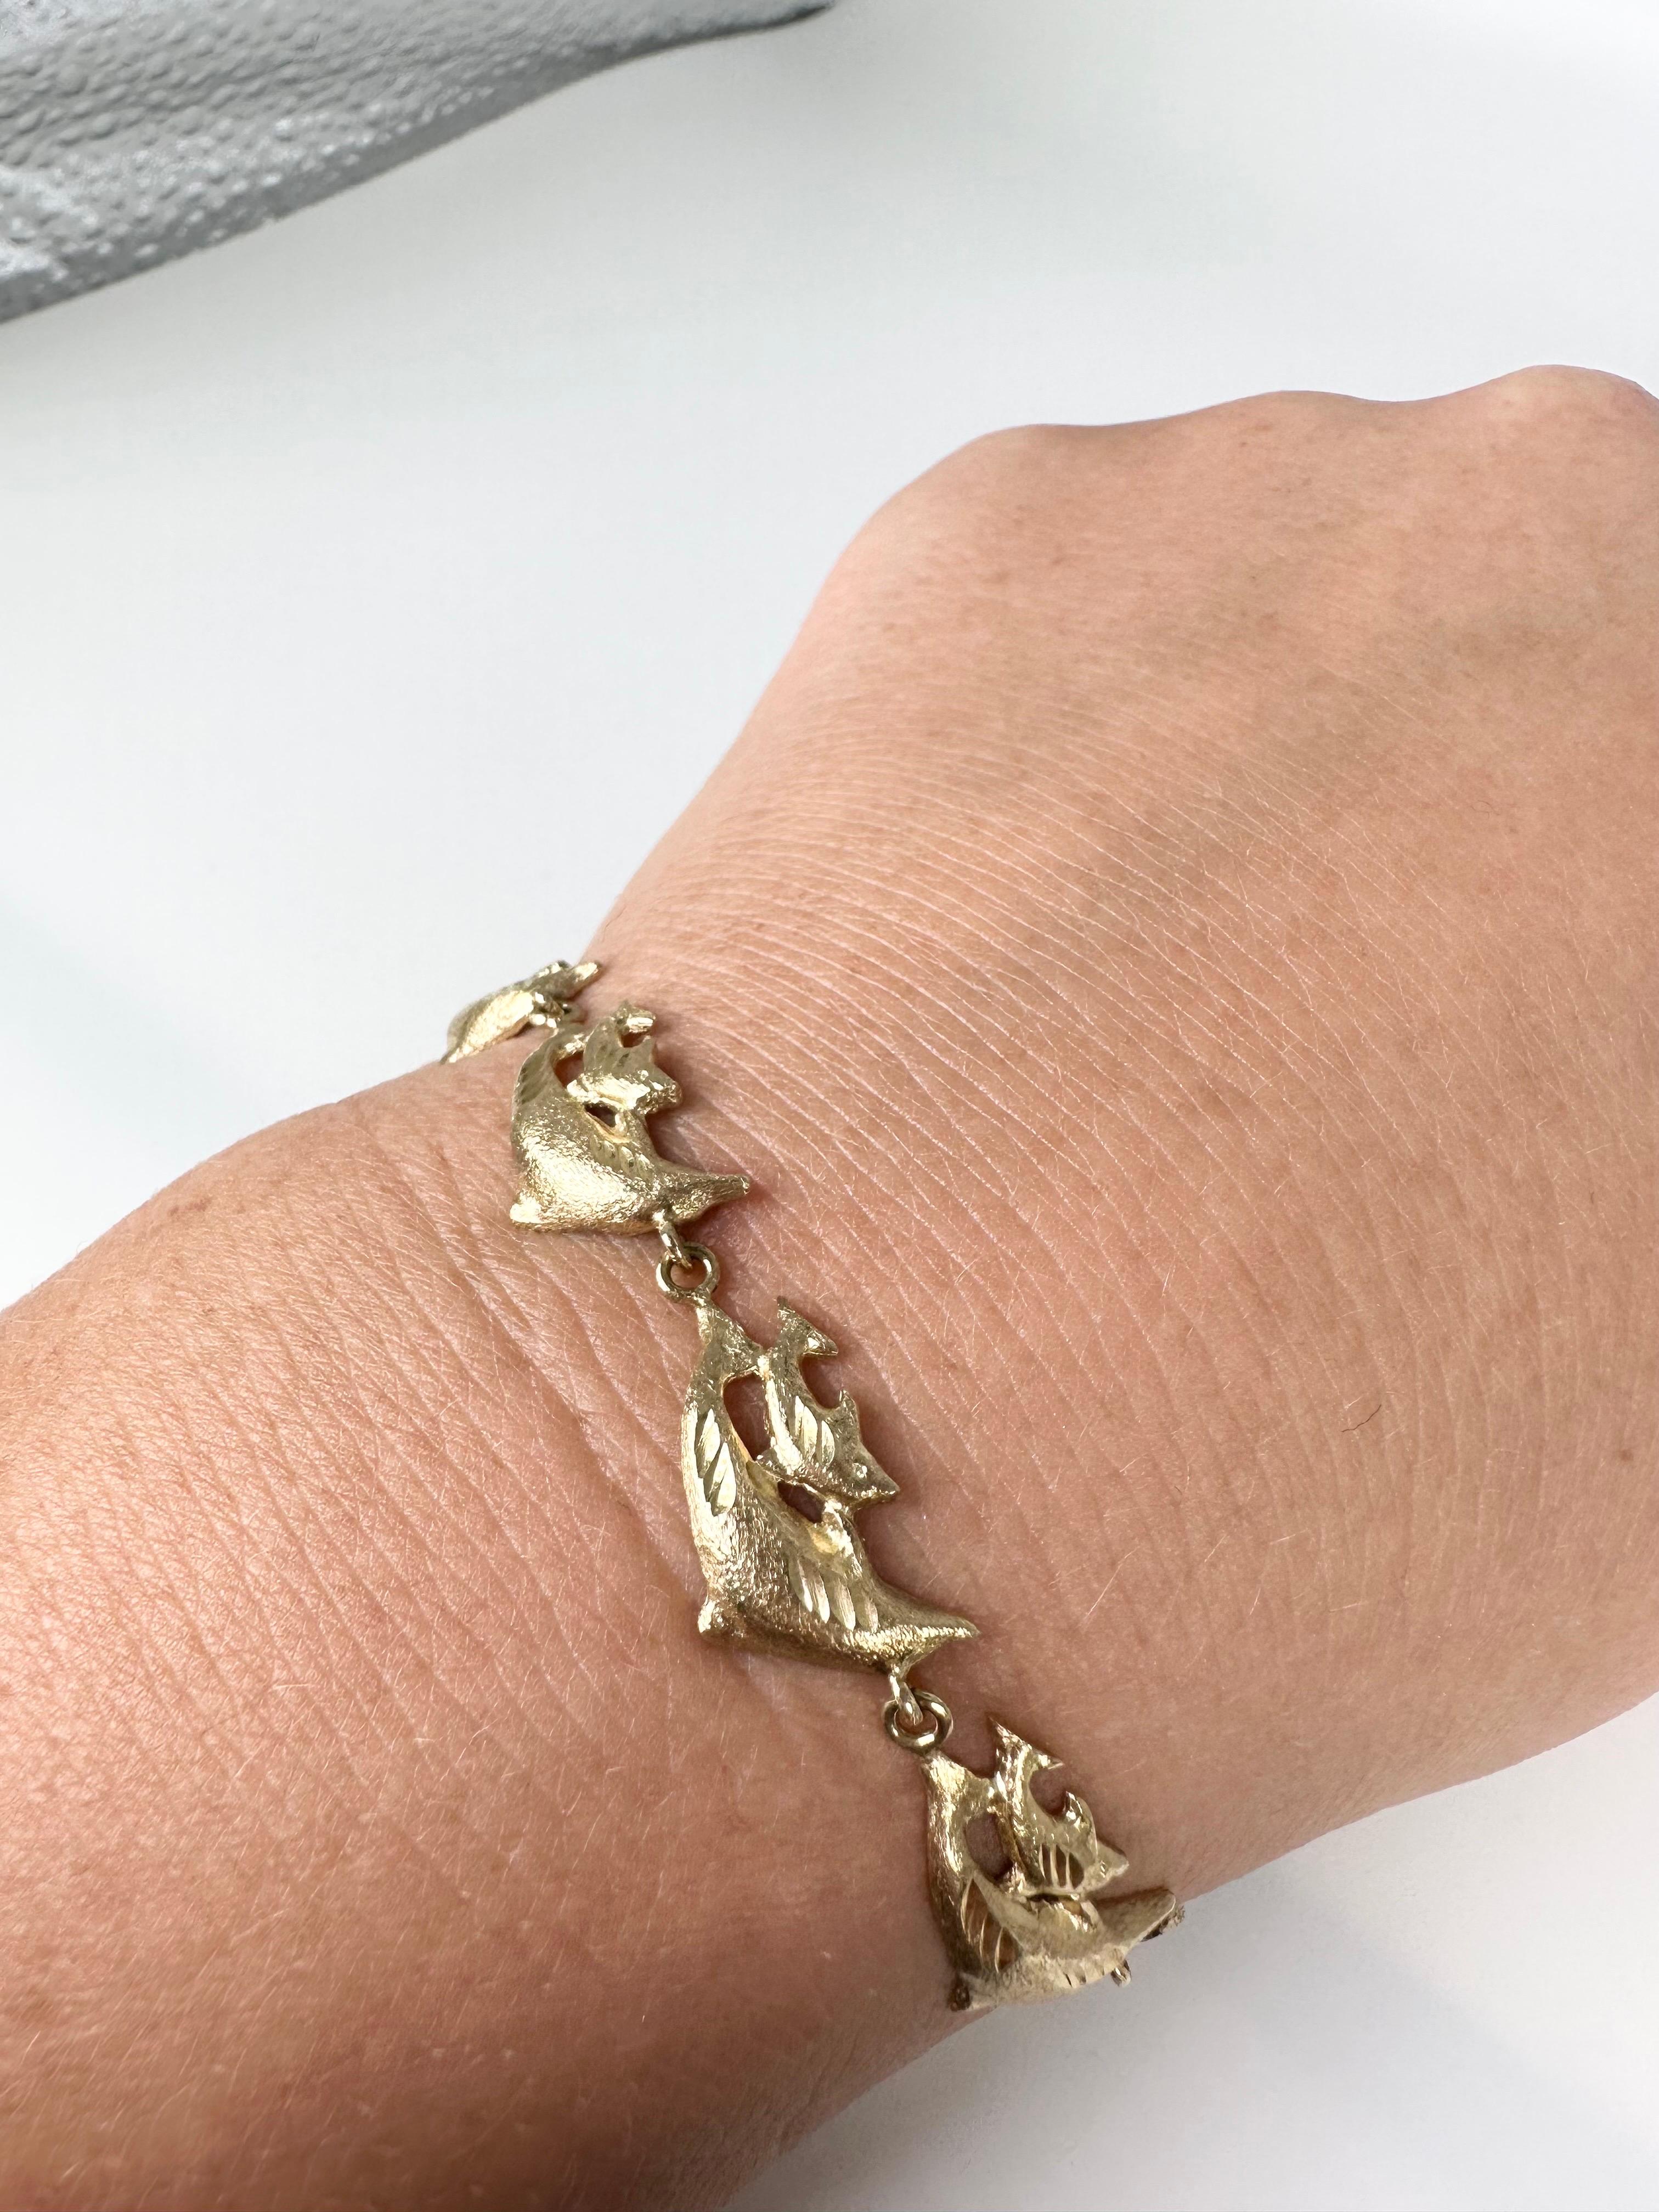 Dolphin bracelet in 14KT yellow gold, simple summer bracelet that goes with any outfit!

GOLD: 14KT gold
Grams:8.83
7 inches long
Item#: 440-00047KAR

WHAT YOU GET AT STAMPAR JEWELERS:
Stampar Jewelers, located in the heart of Jupiter, Florida, is a